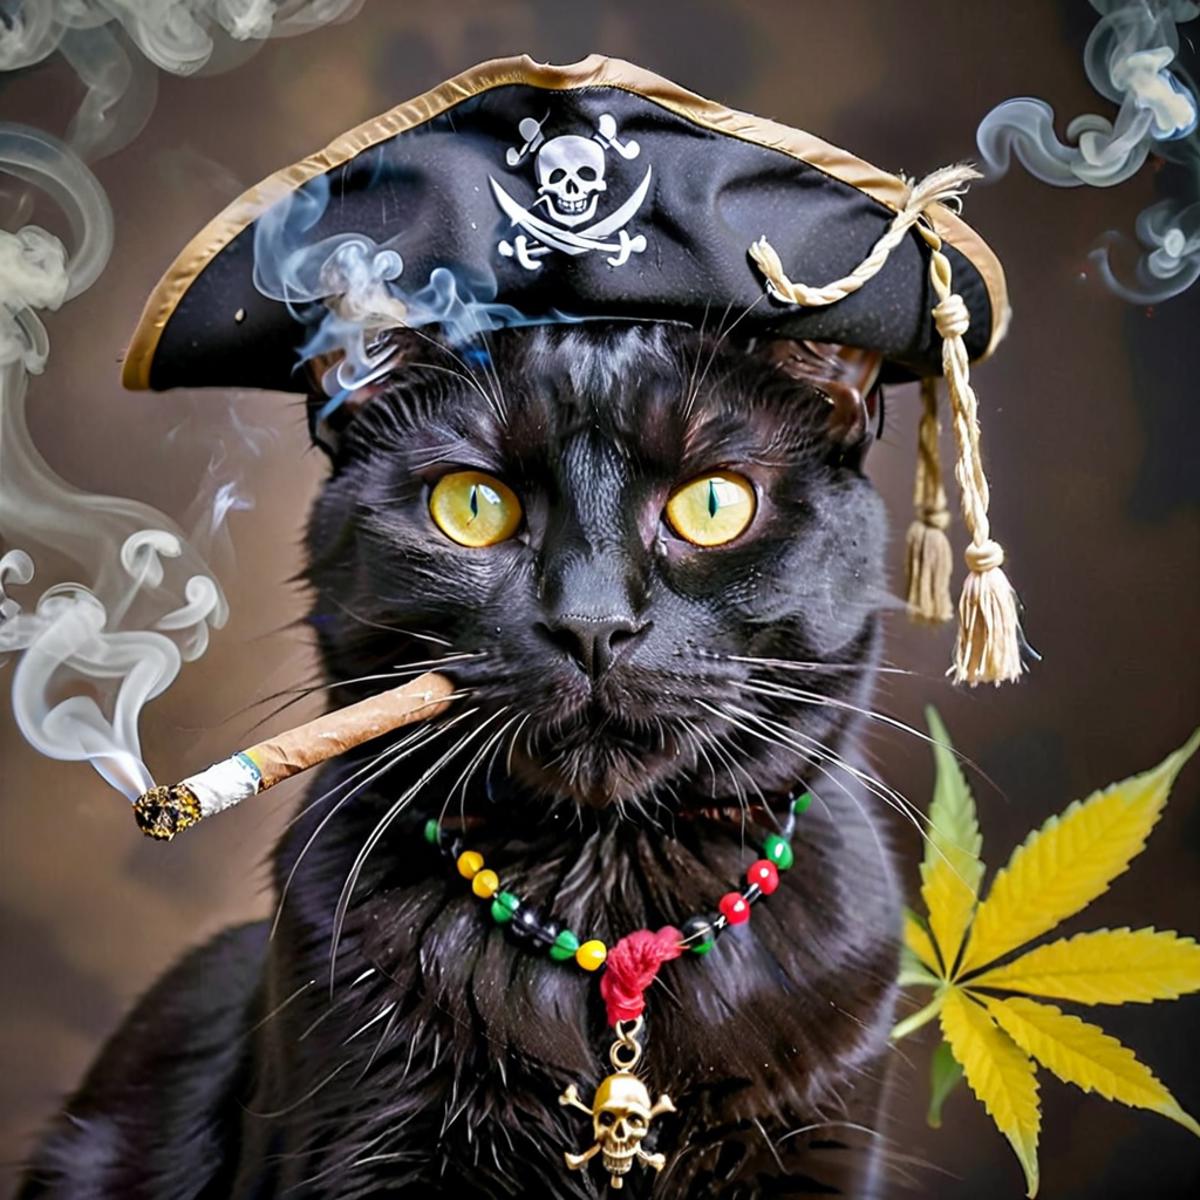 Black cat wearing a pirate hat and smoking a cigar.